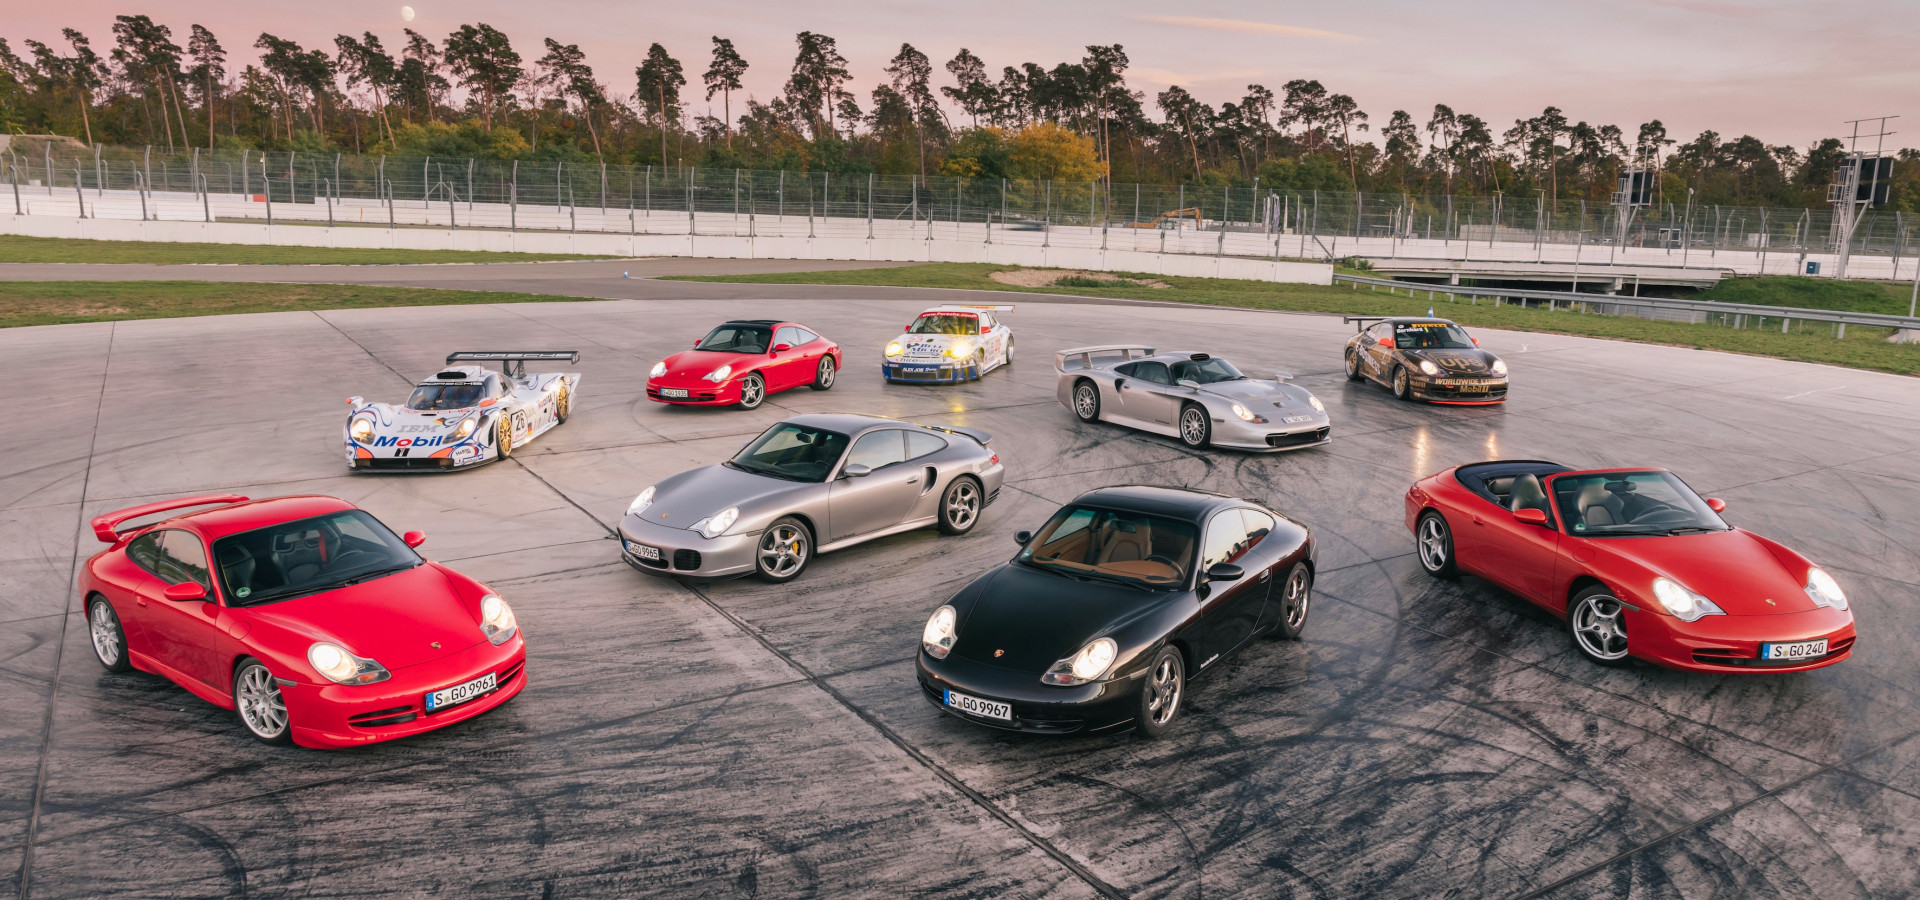 Trailblazer for the future of the 911: 25 years of the 996-generation Porsche 911